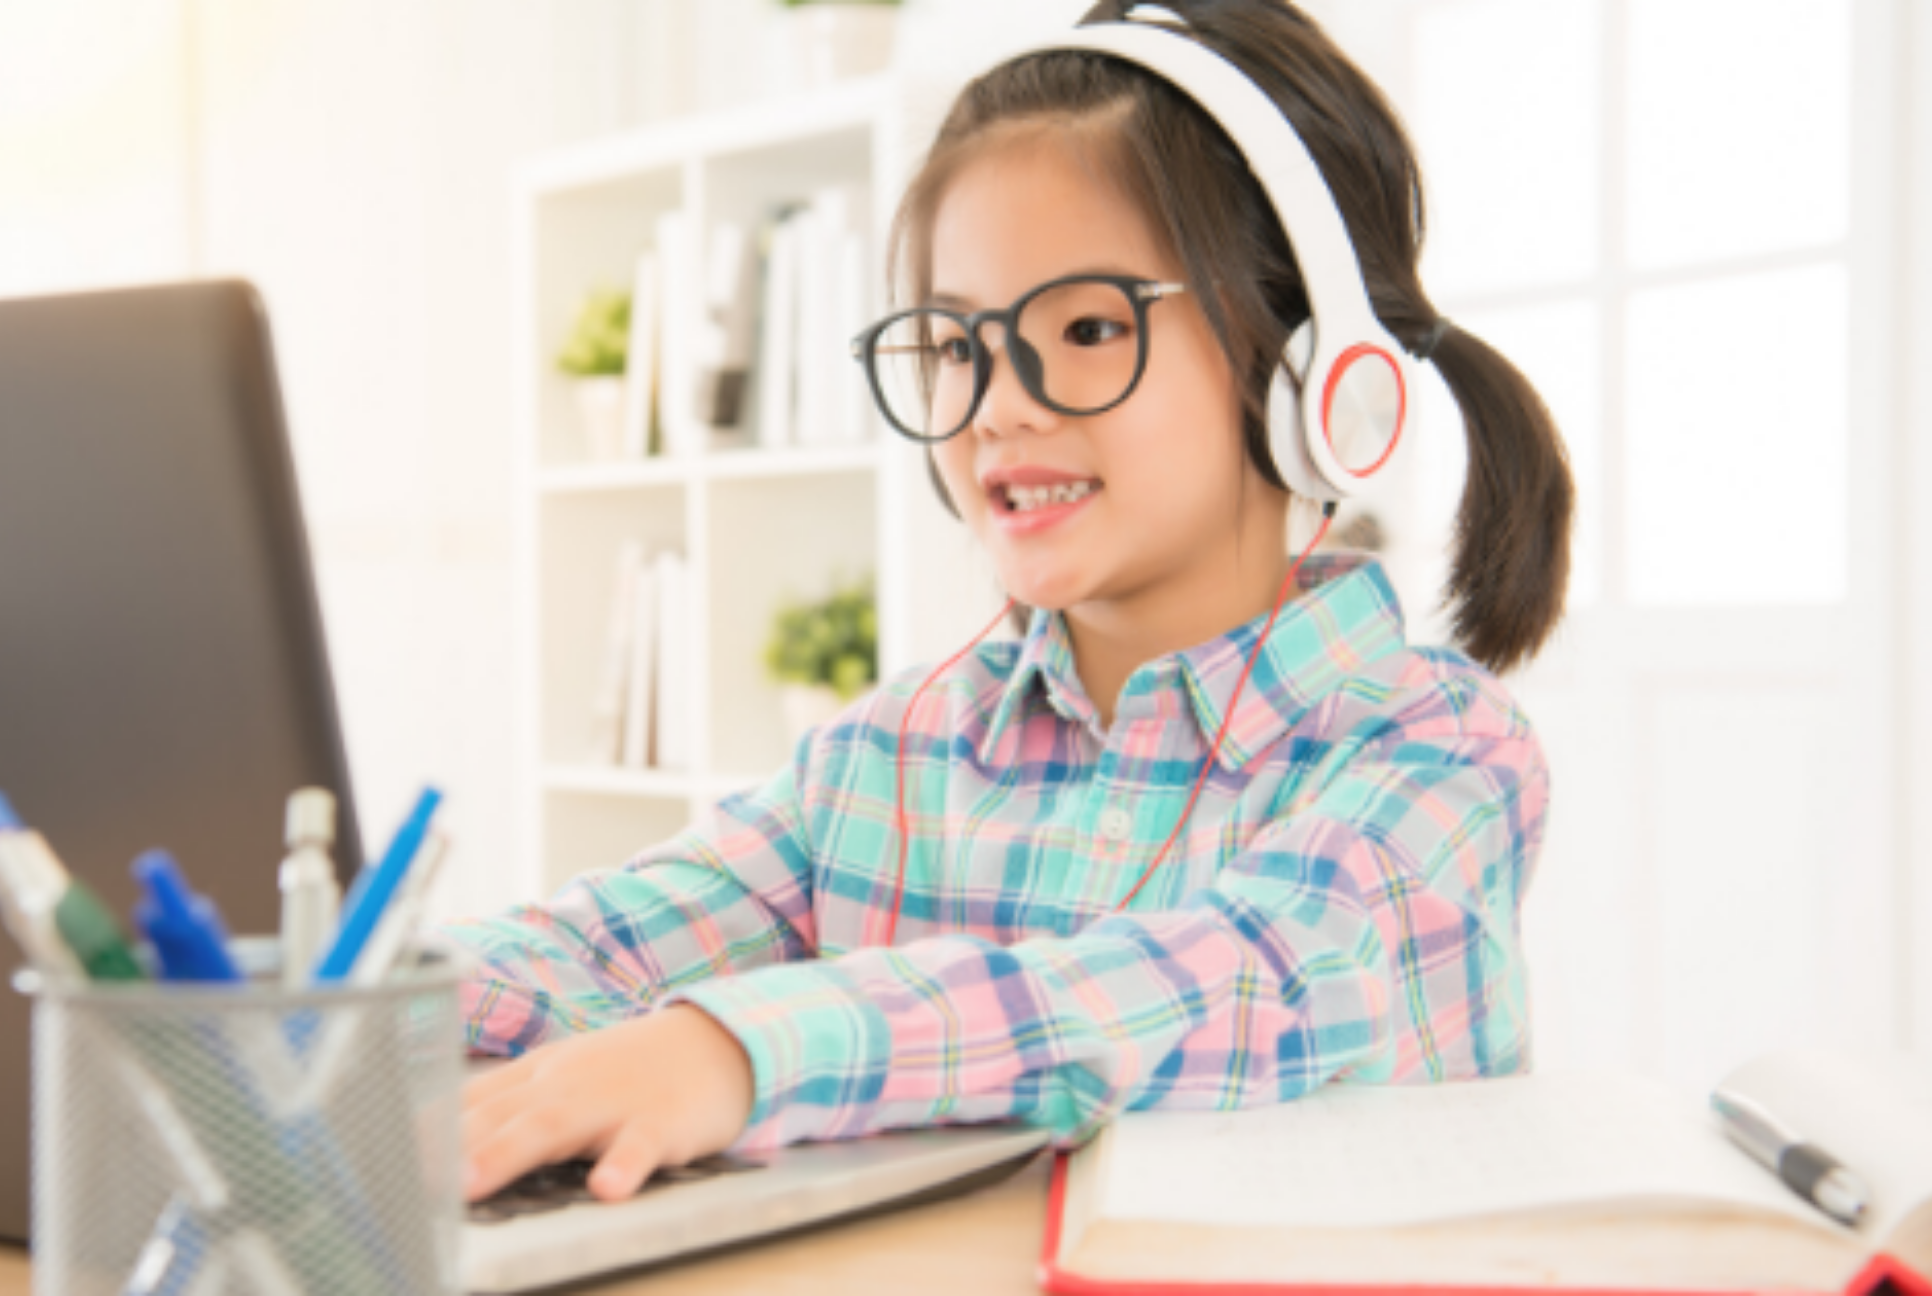 young child wears headphones and works on a laptop